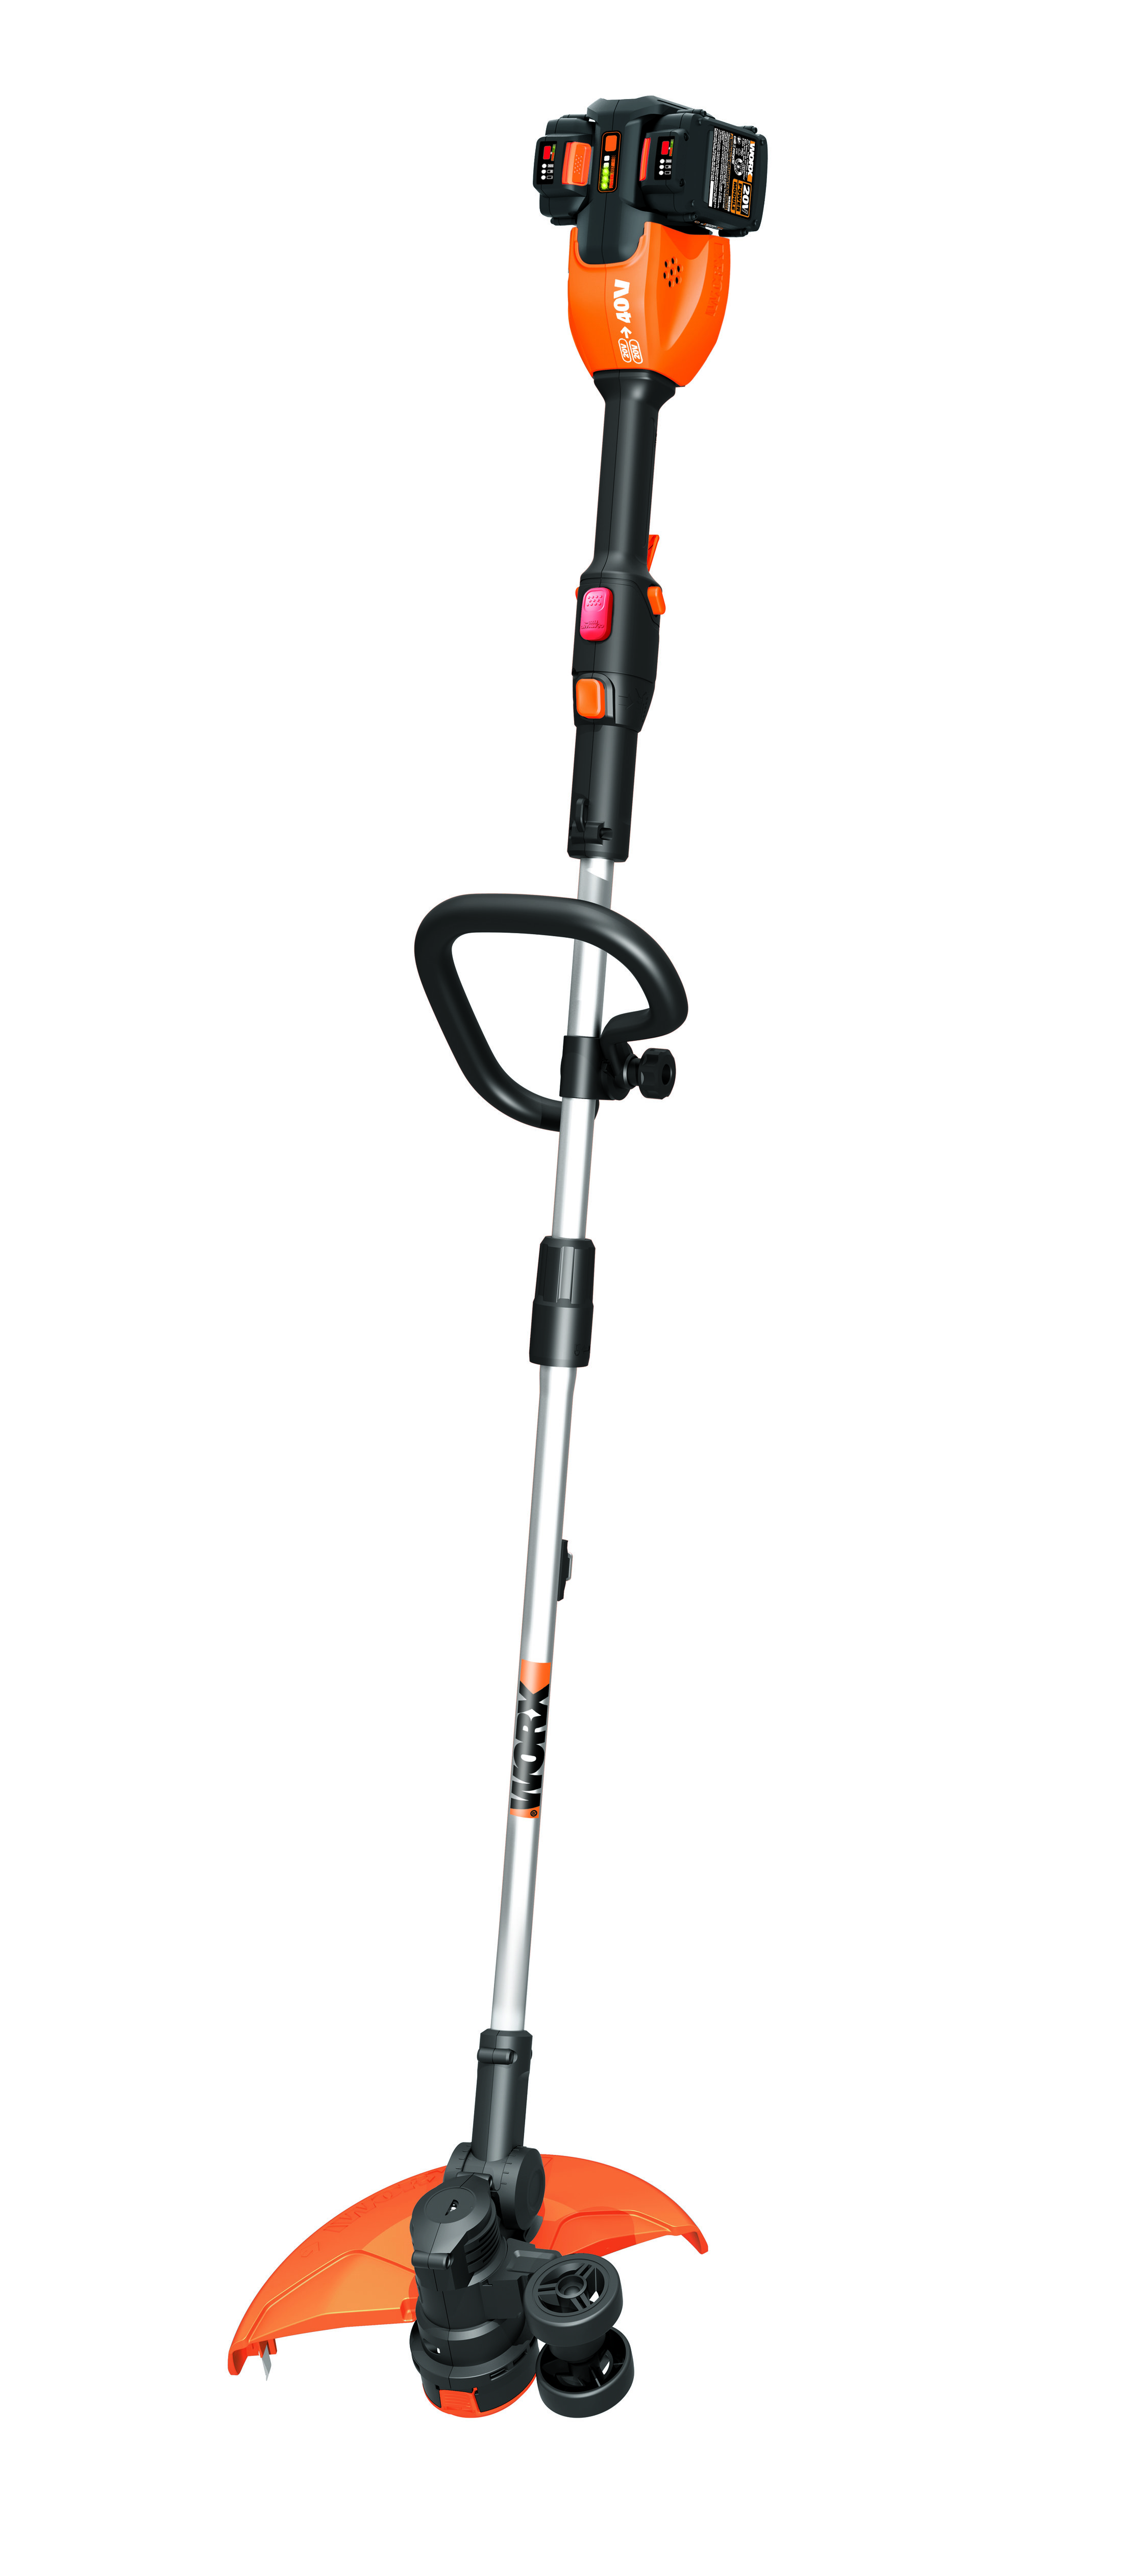 WORX 2x20, 40V, Trimmer/Edger combines performance of two batteries to deliver 40 volts of power.